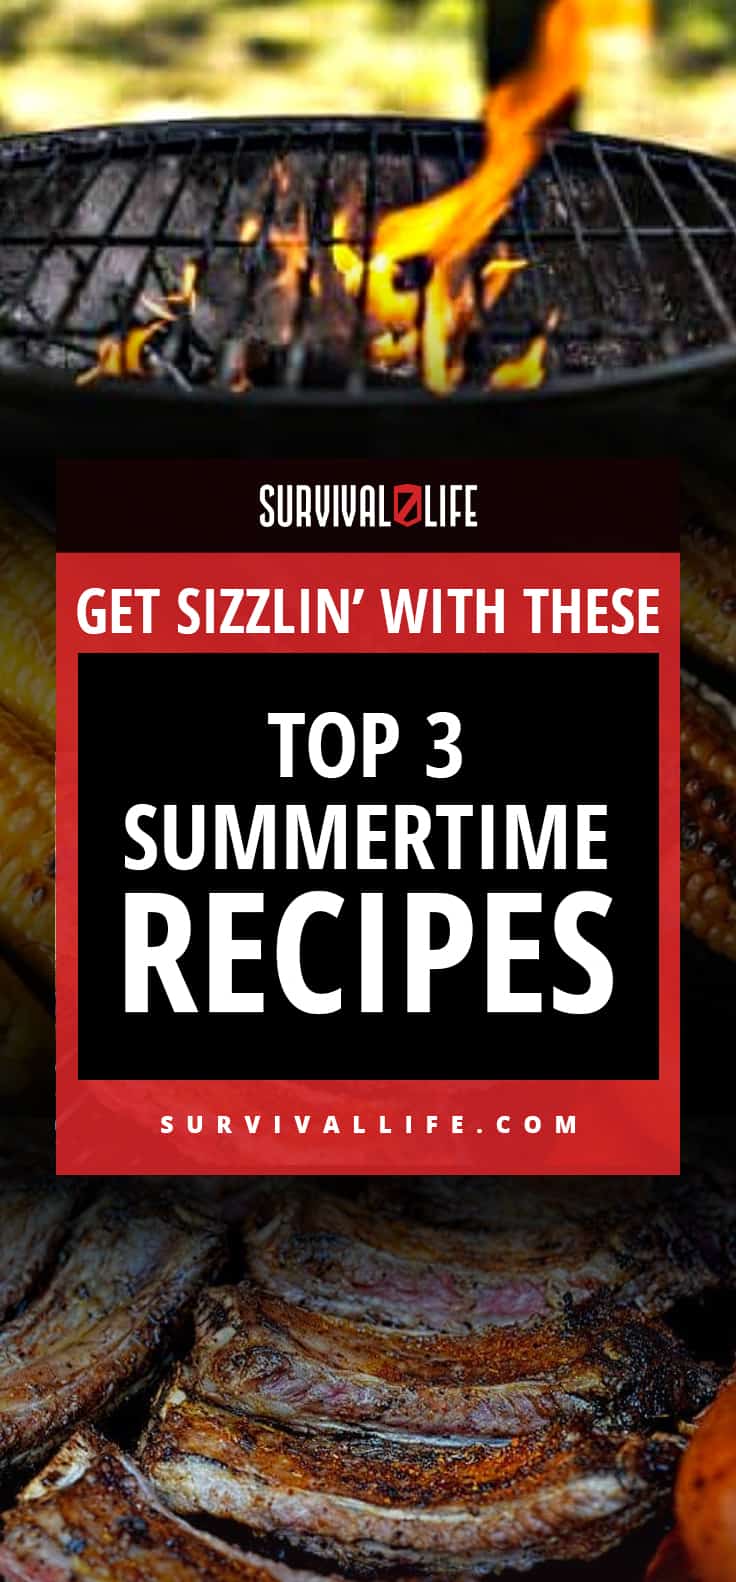 Get Sizzlin’ With These Top 3 Summertime Recipes